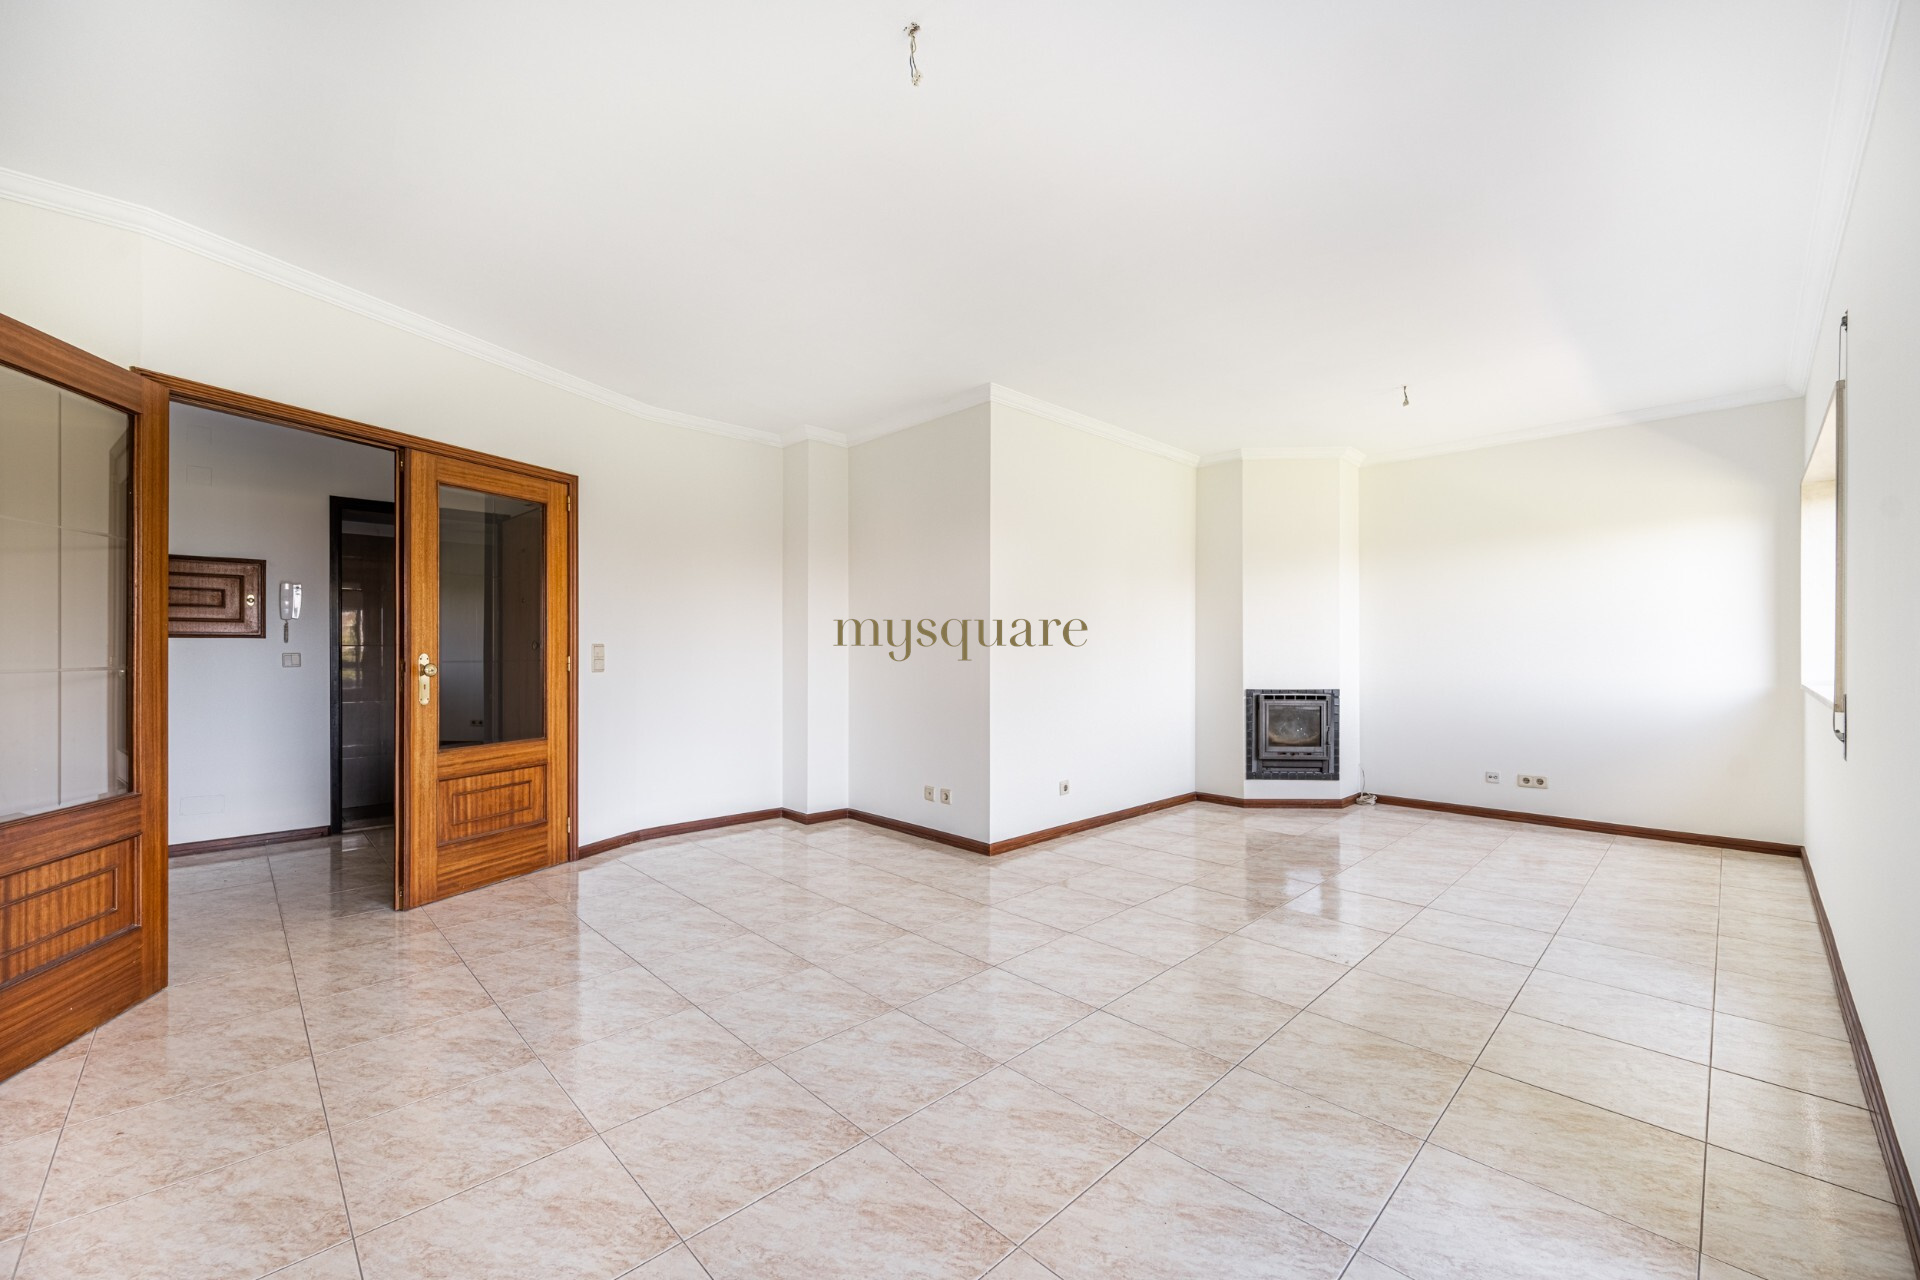 3 bedroom apartment in the center of Gulpilhares